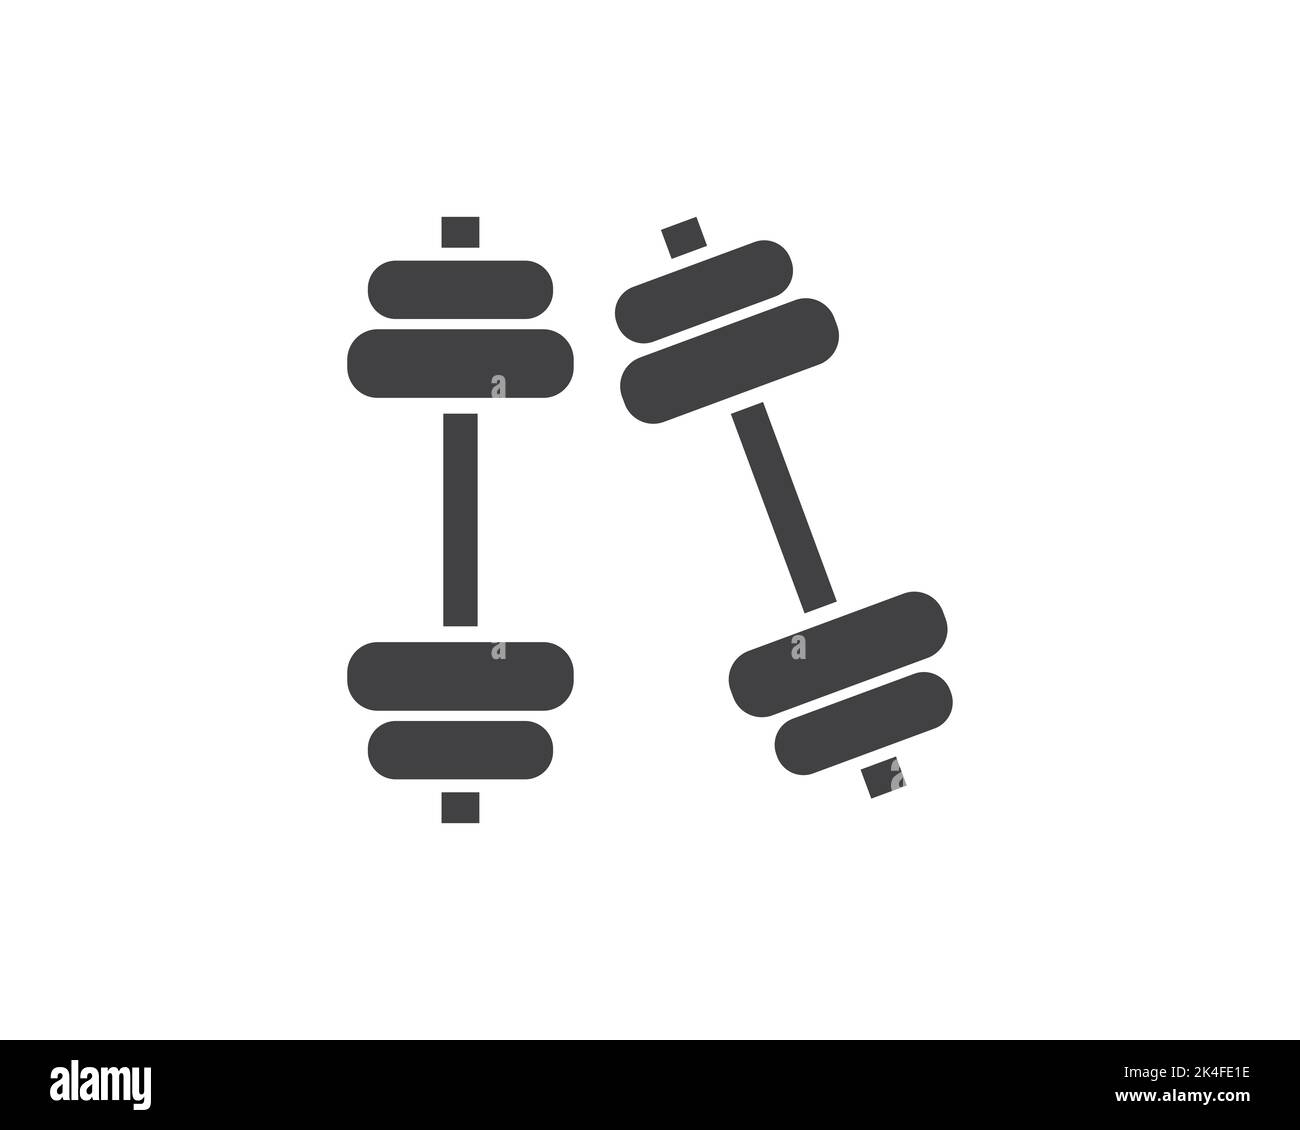 dumbbell health weight lifting icon vector symbol design illustration Stock Vector